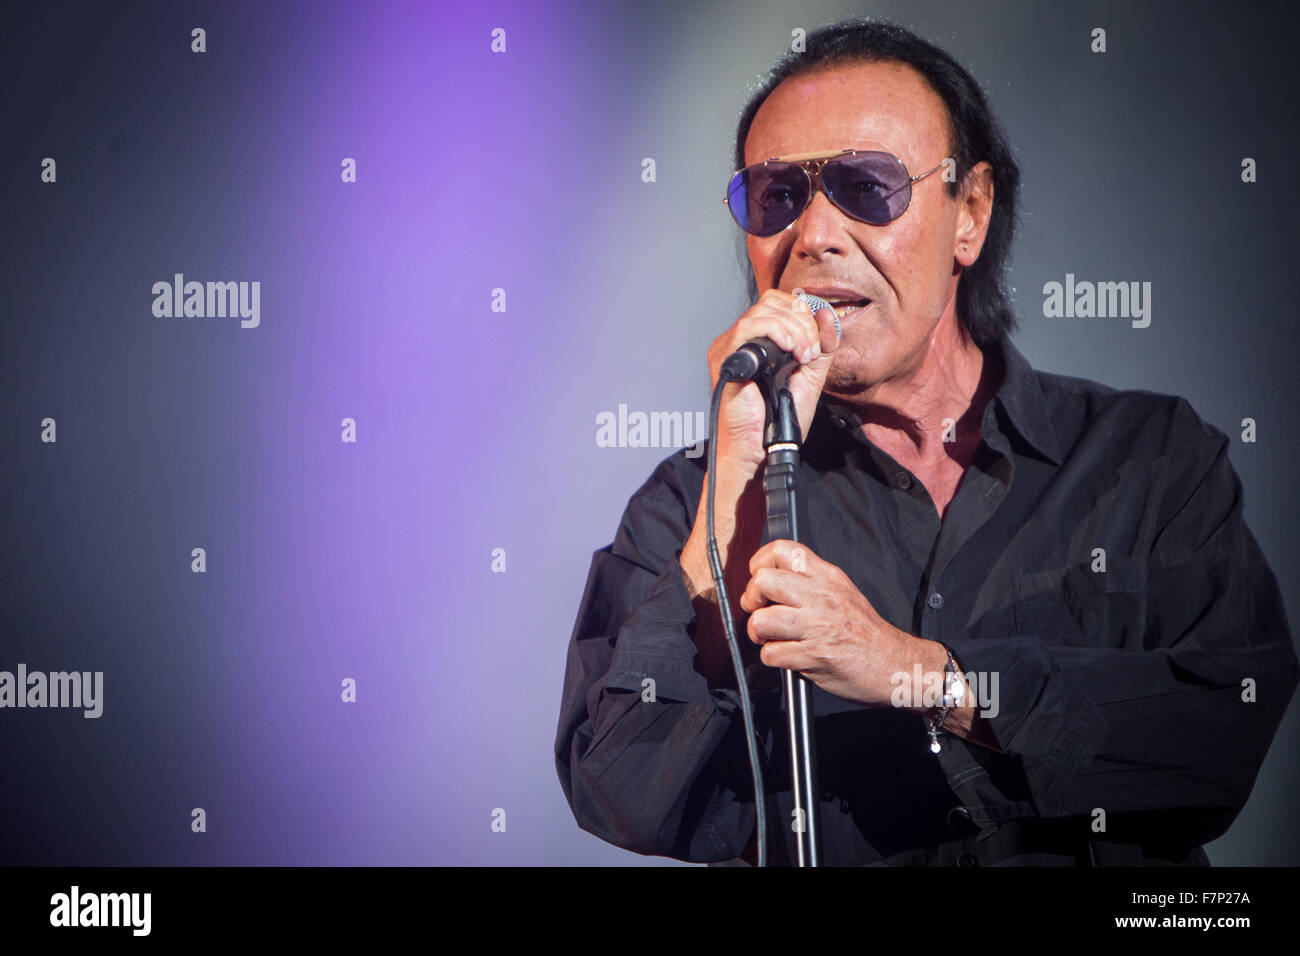 Milan Italy. 01th December 2015. The Italian singer-songwriter ANTONELLO VENDITTI performs live on stage at Mediolanum Forum during the 'Tortuga Tour' Credit:  Rodolfo Sassano/Alamy Live News Stock Photo